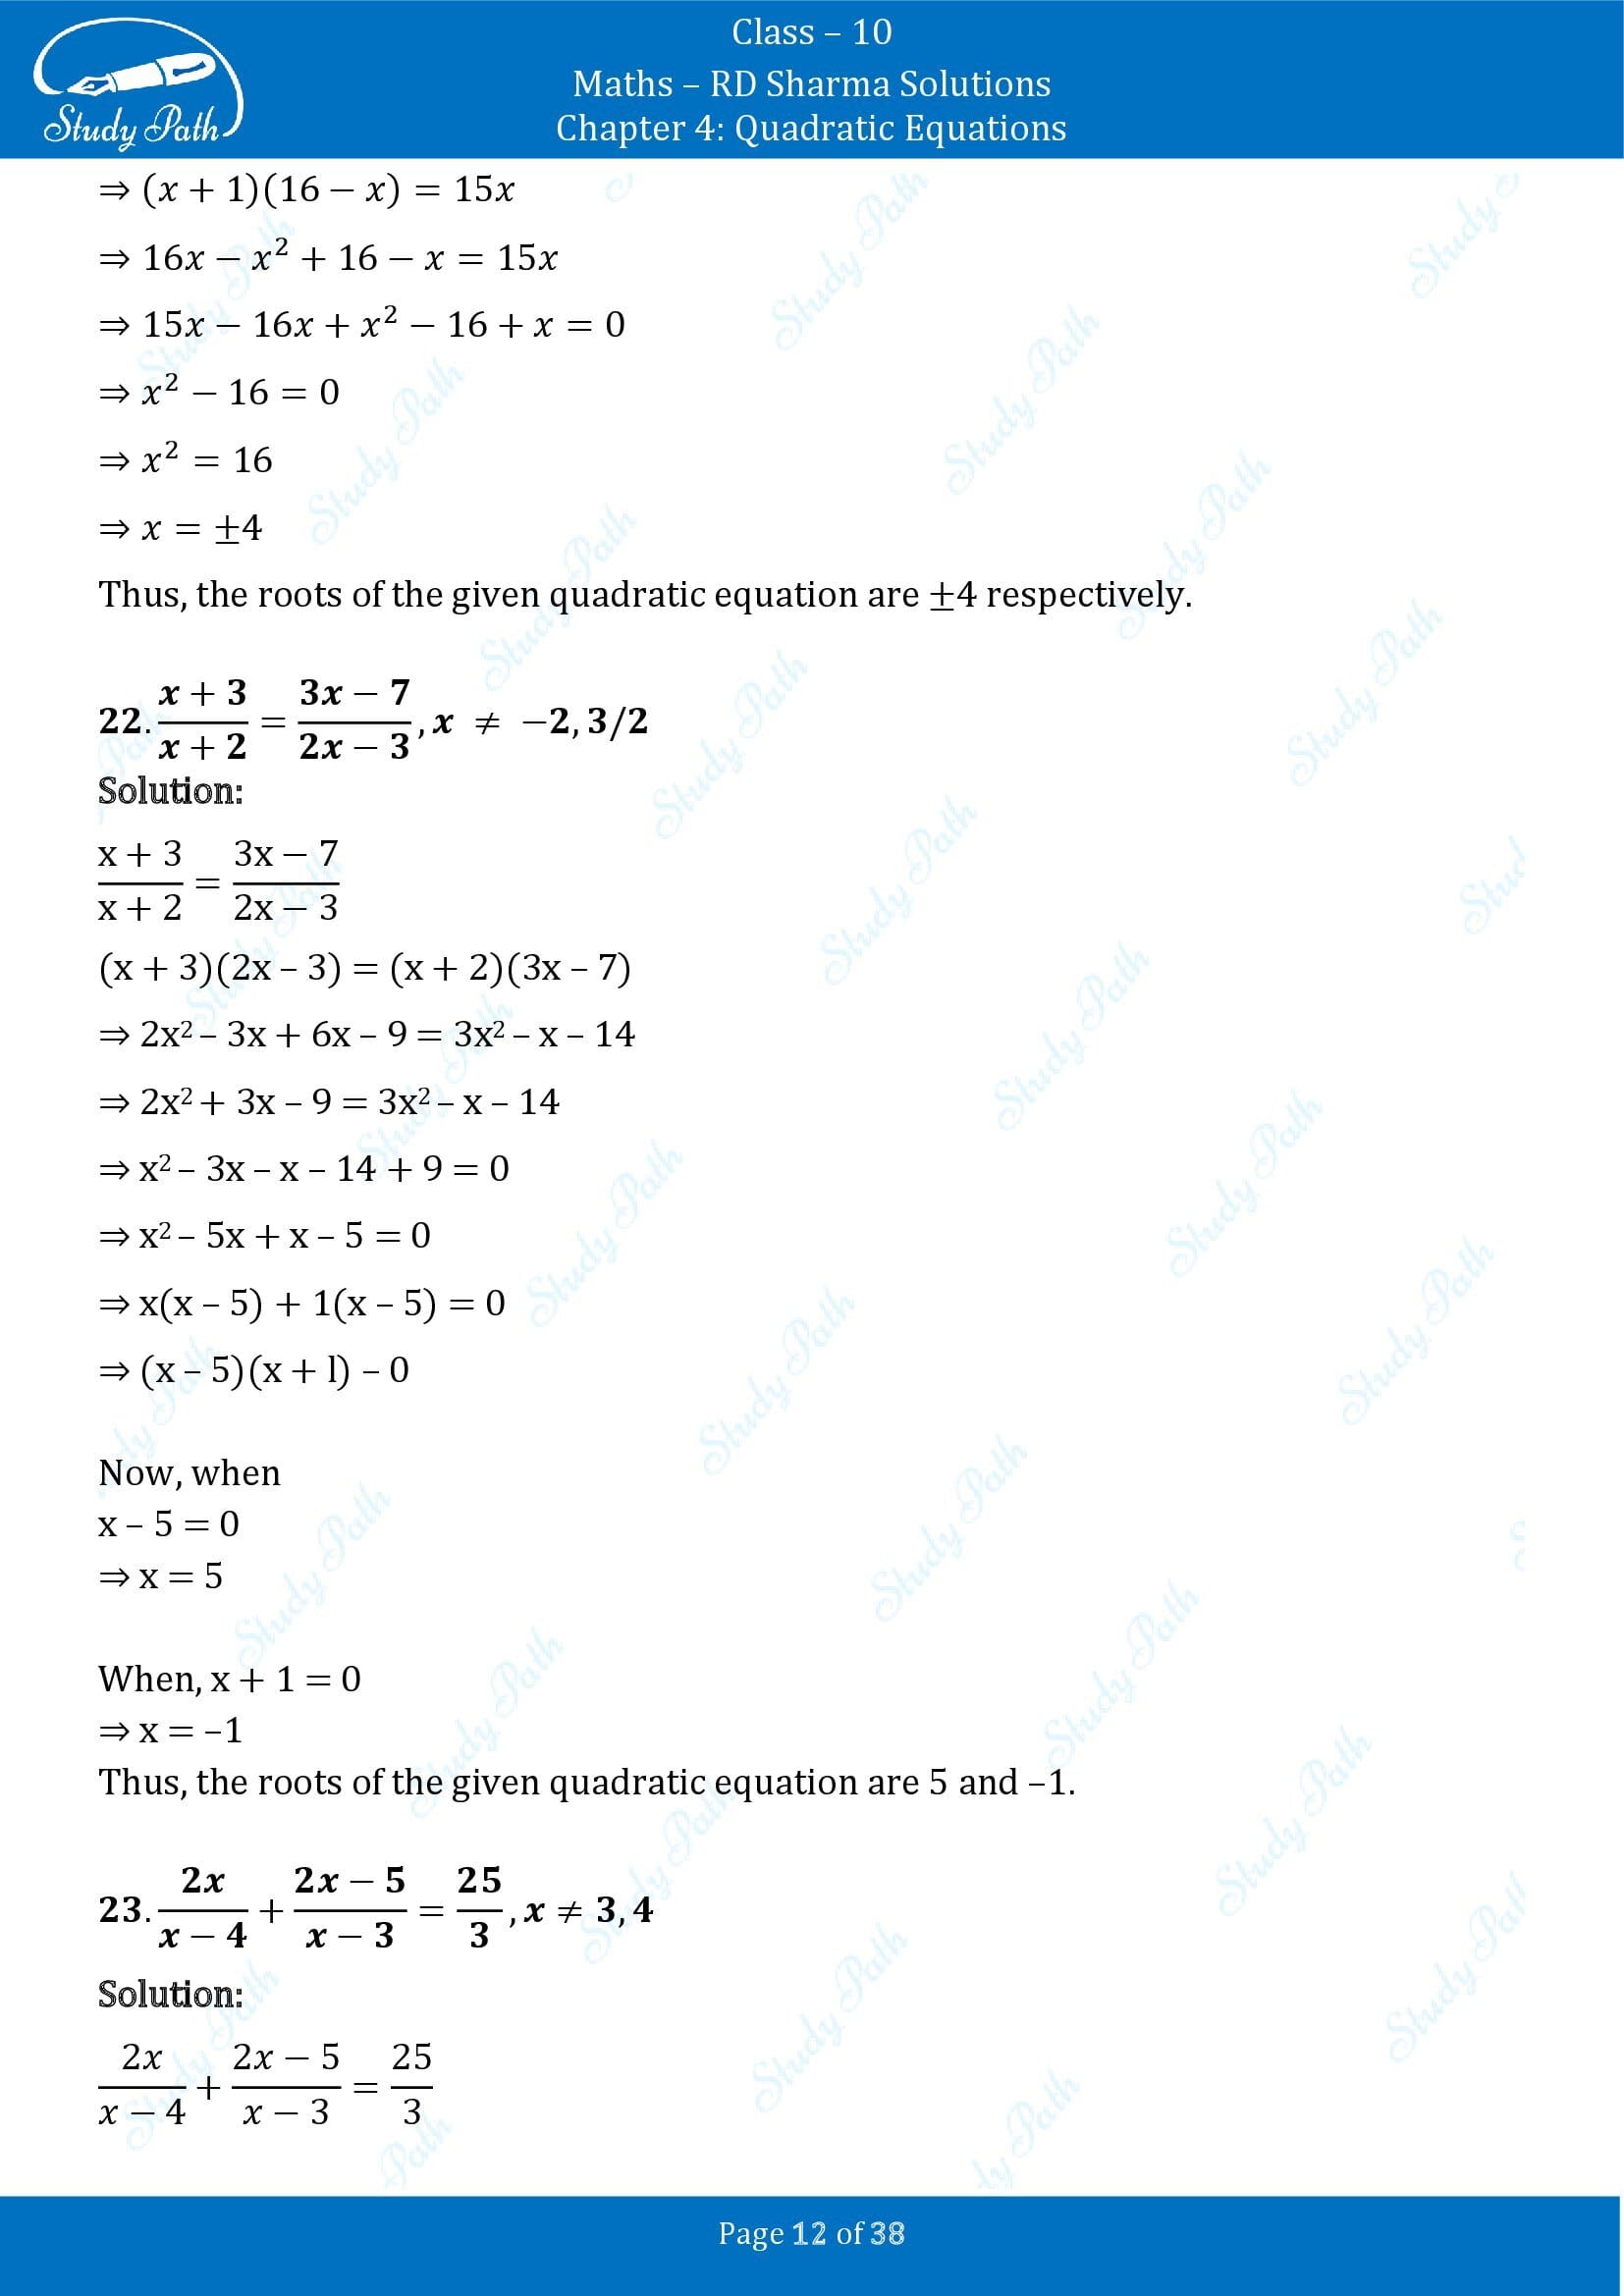 RD Sharma Solutions Class 10 Chapter 4 Quadratic Equations Exercise 4.3 00012